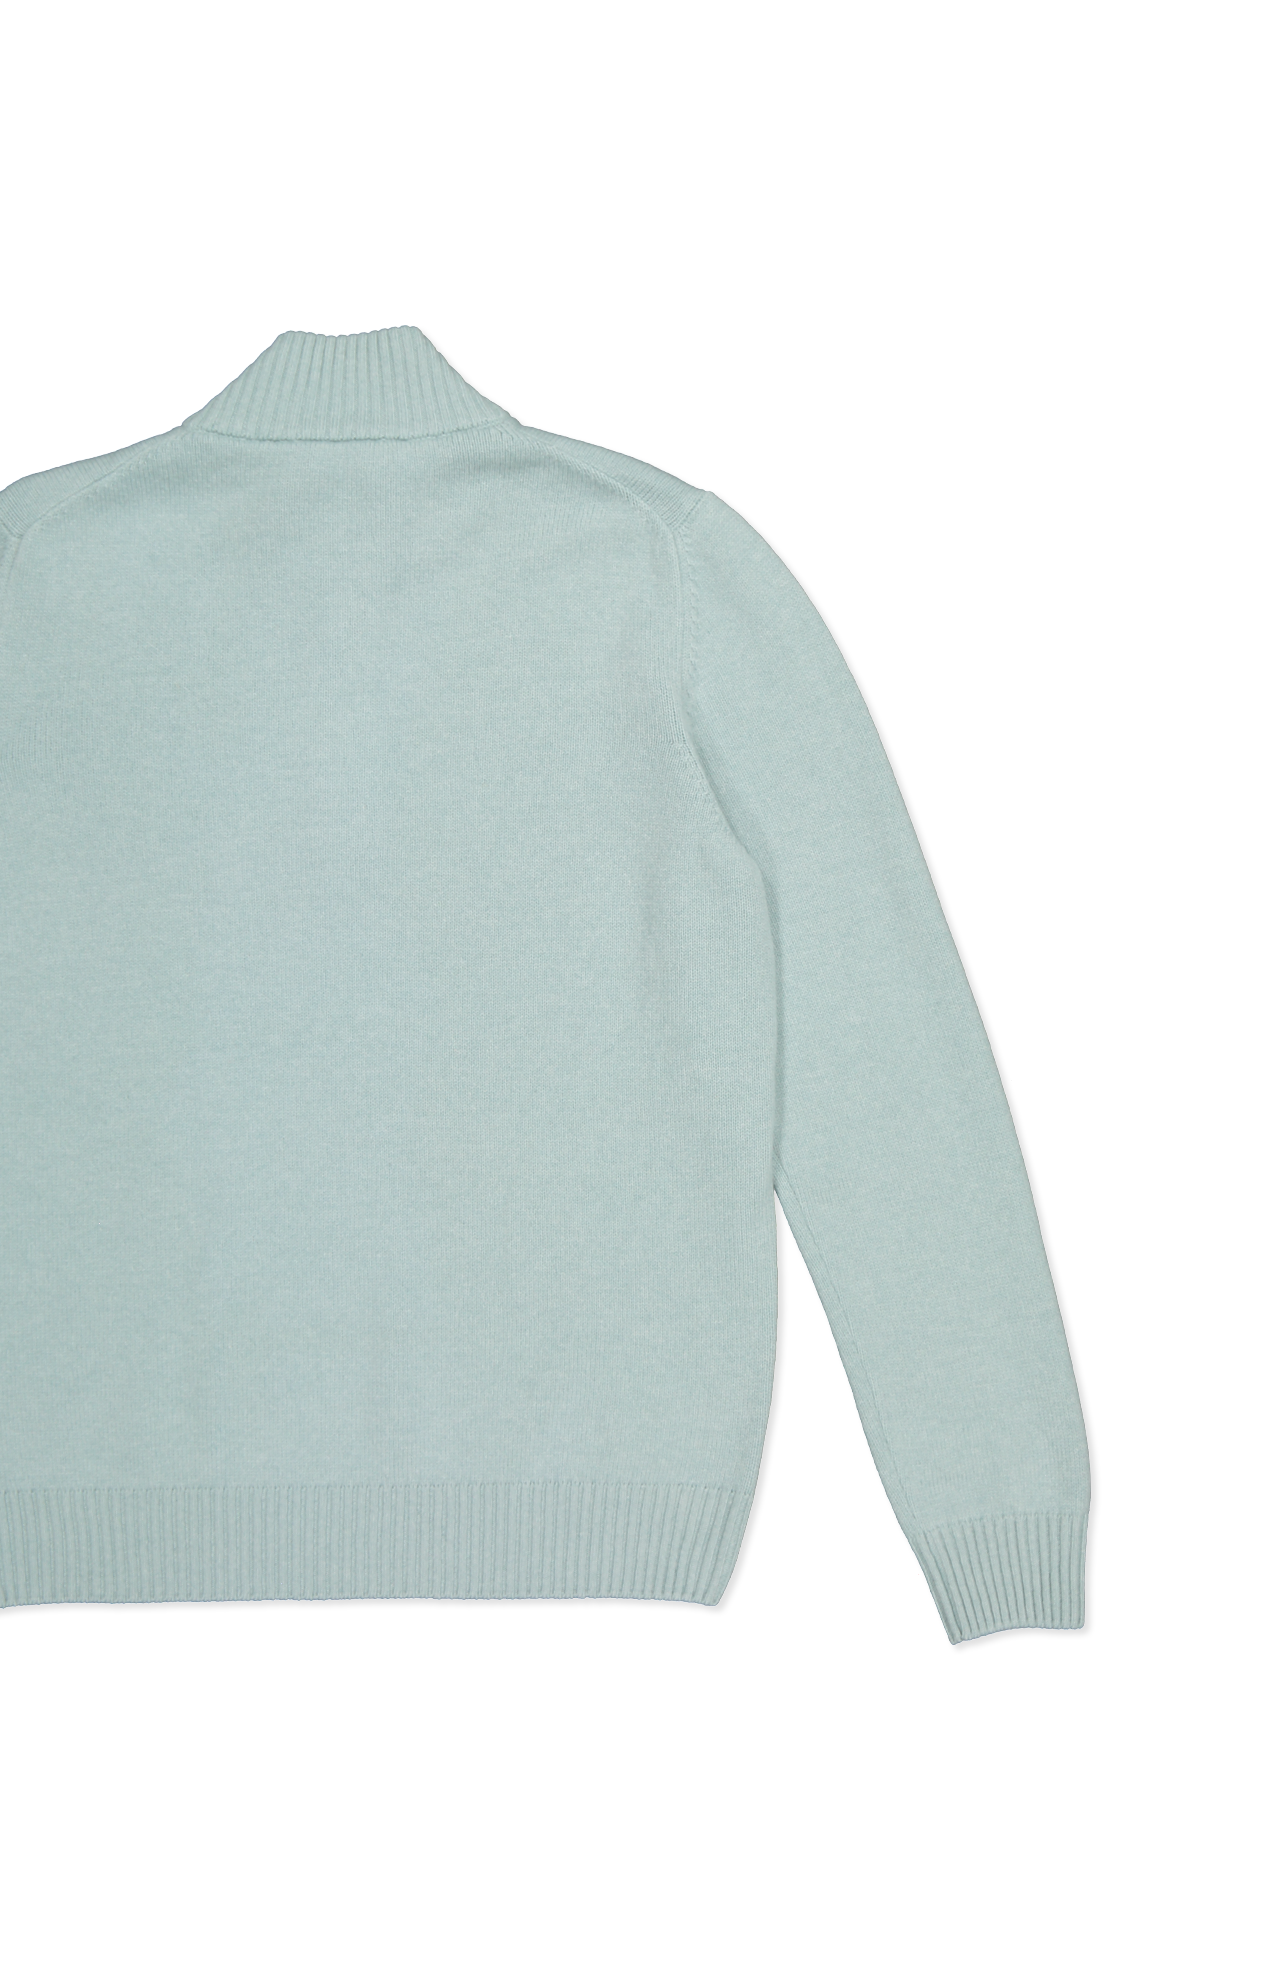 Gran Sasso Wool/Cashmere Quarter Zip Sweater in Mint Green - Back Detail Image  (6897541251187)